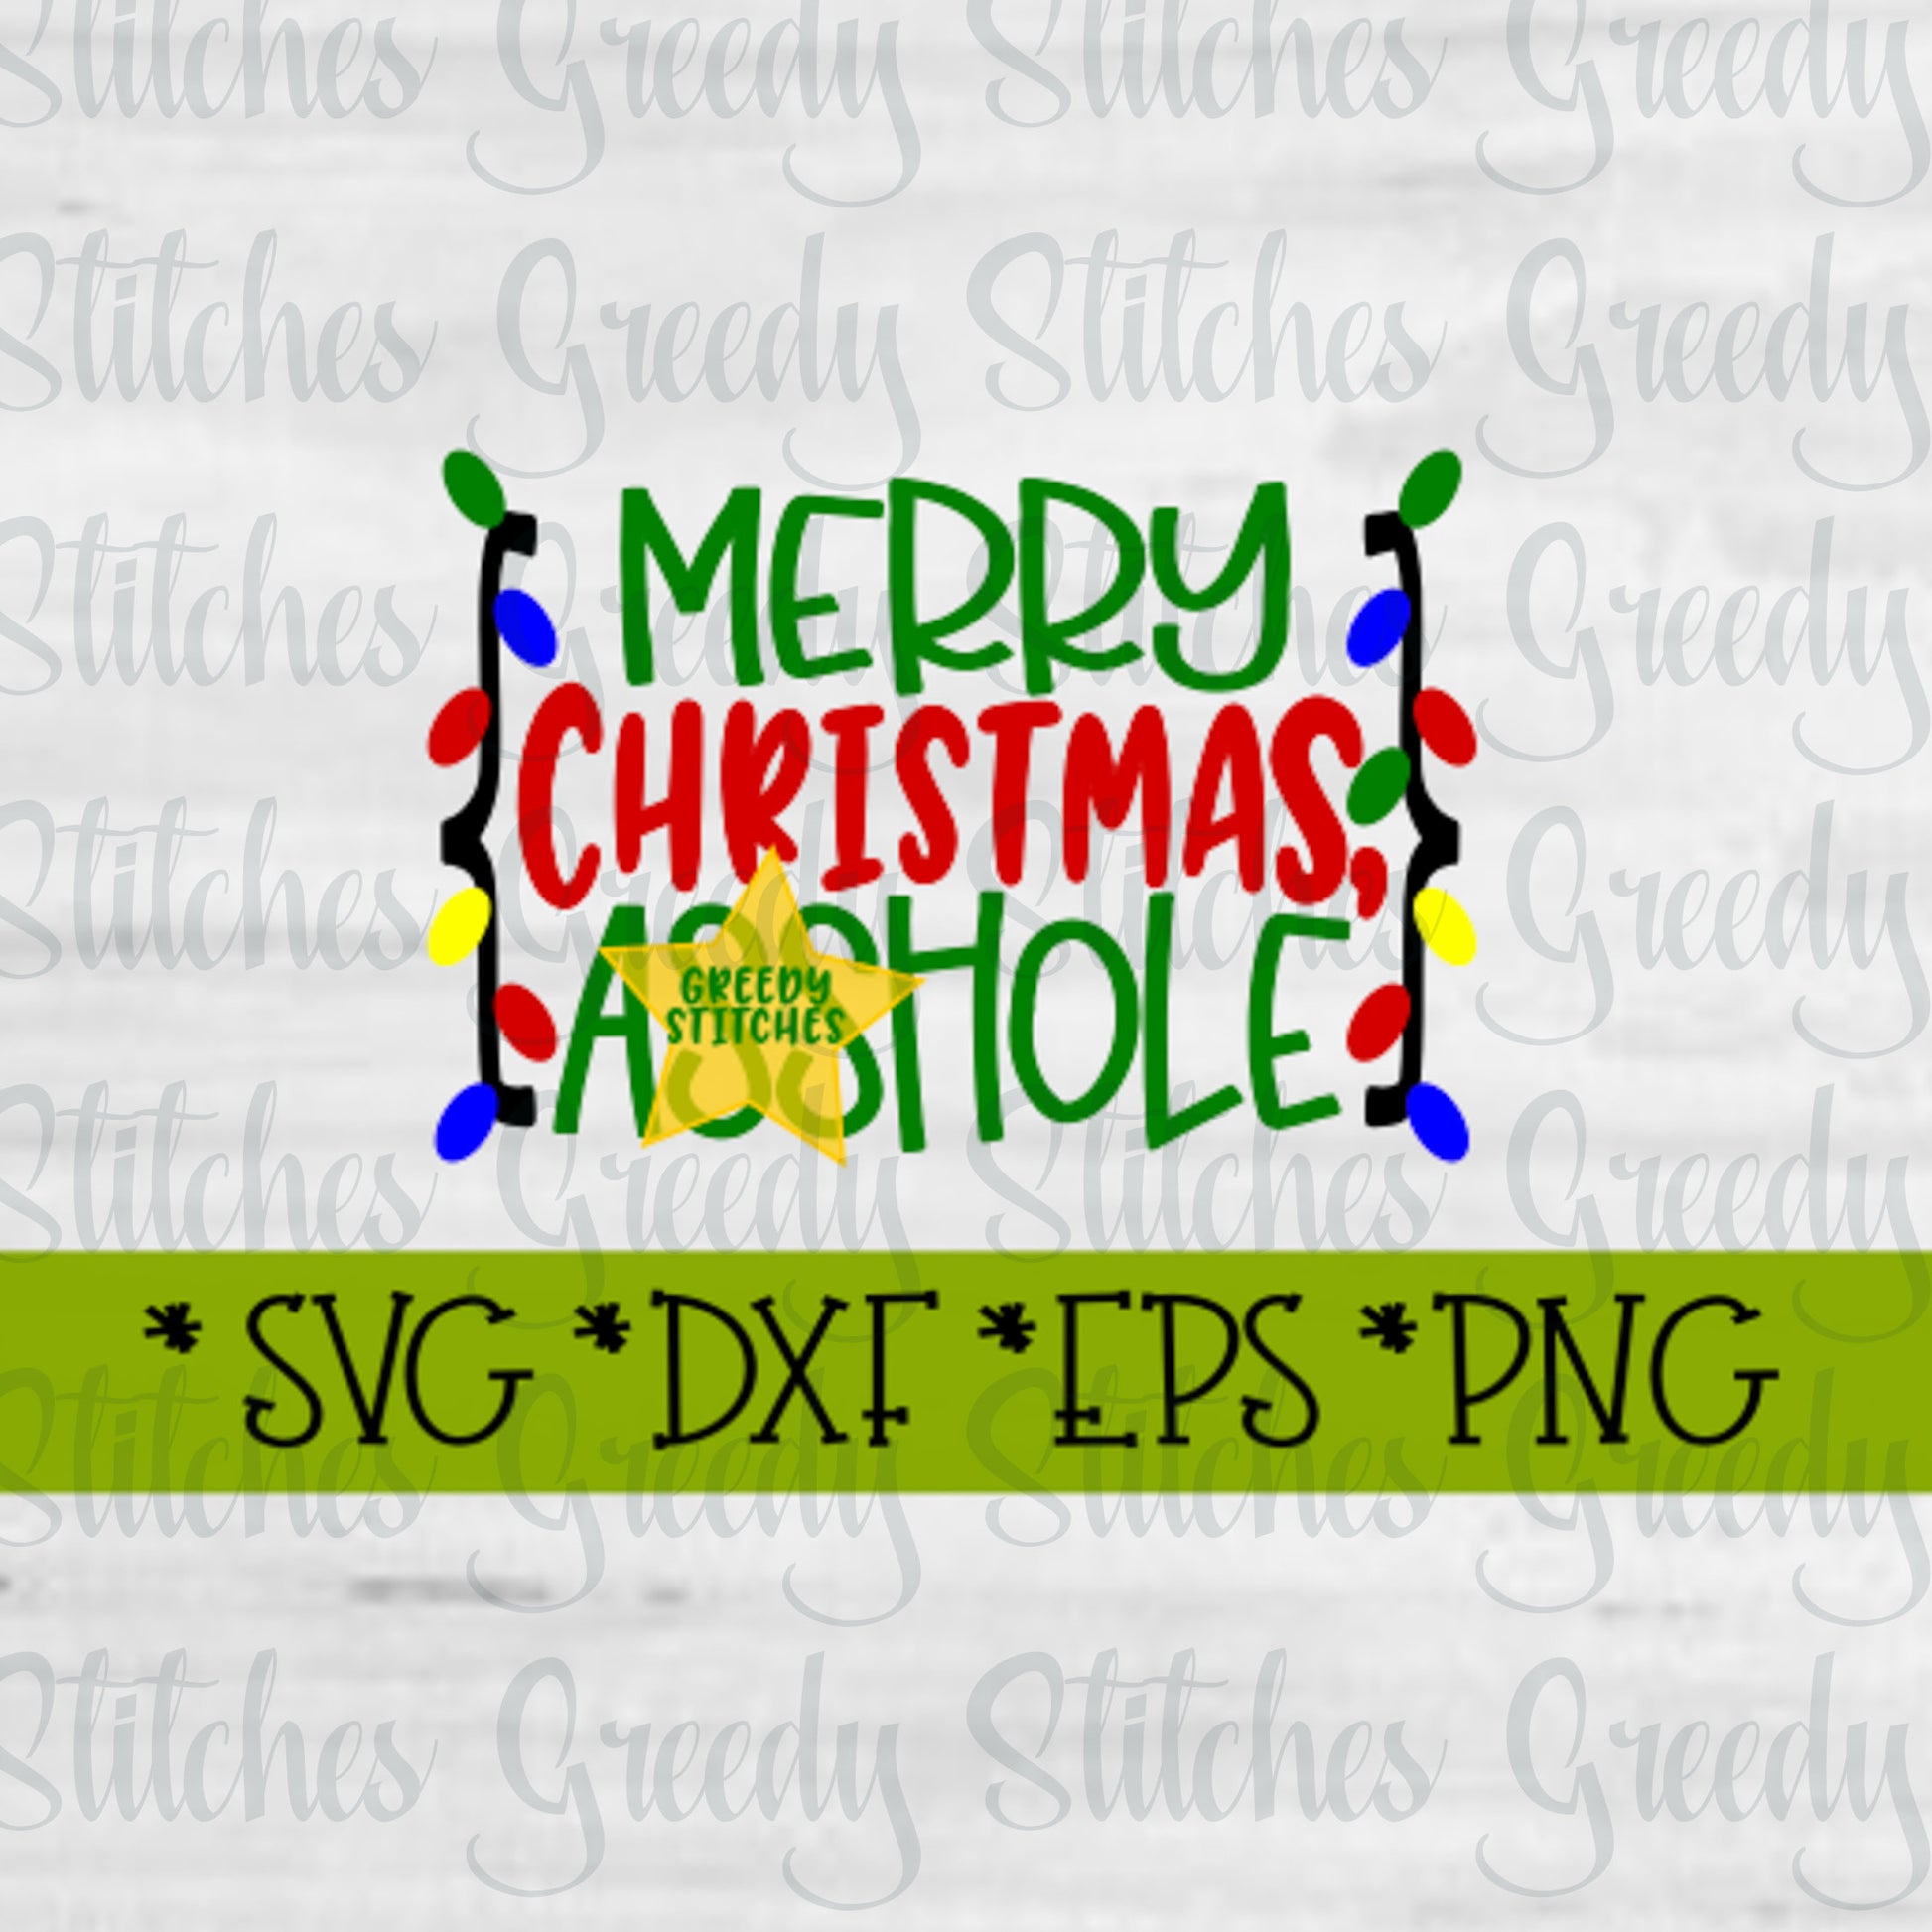 Merry Christmas, *sshole svg, dxf, eps, png. Christmas SvG | Toilet Paper SvG | SVG | Merry Christmas, DxF | Instant Download Cut File